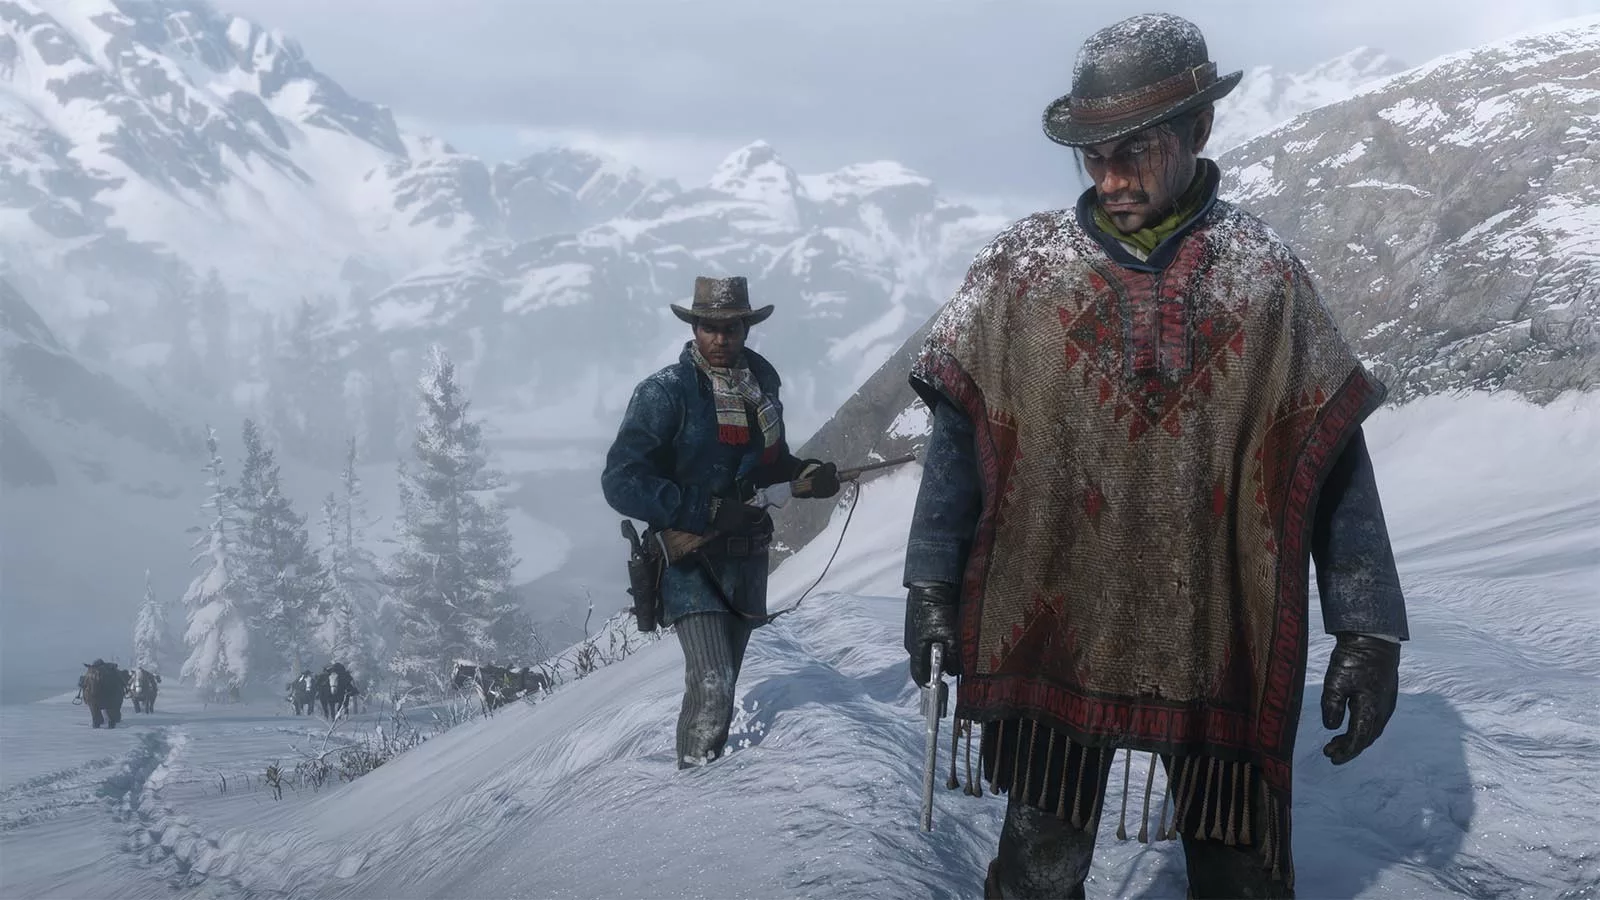 Two gun wielding outlaws hike through a snow covered mountain pass, with horses in the background.